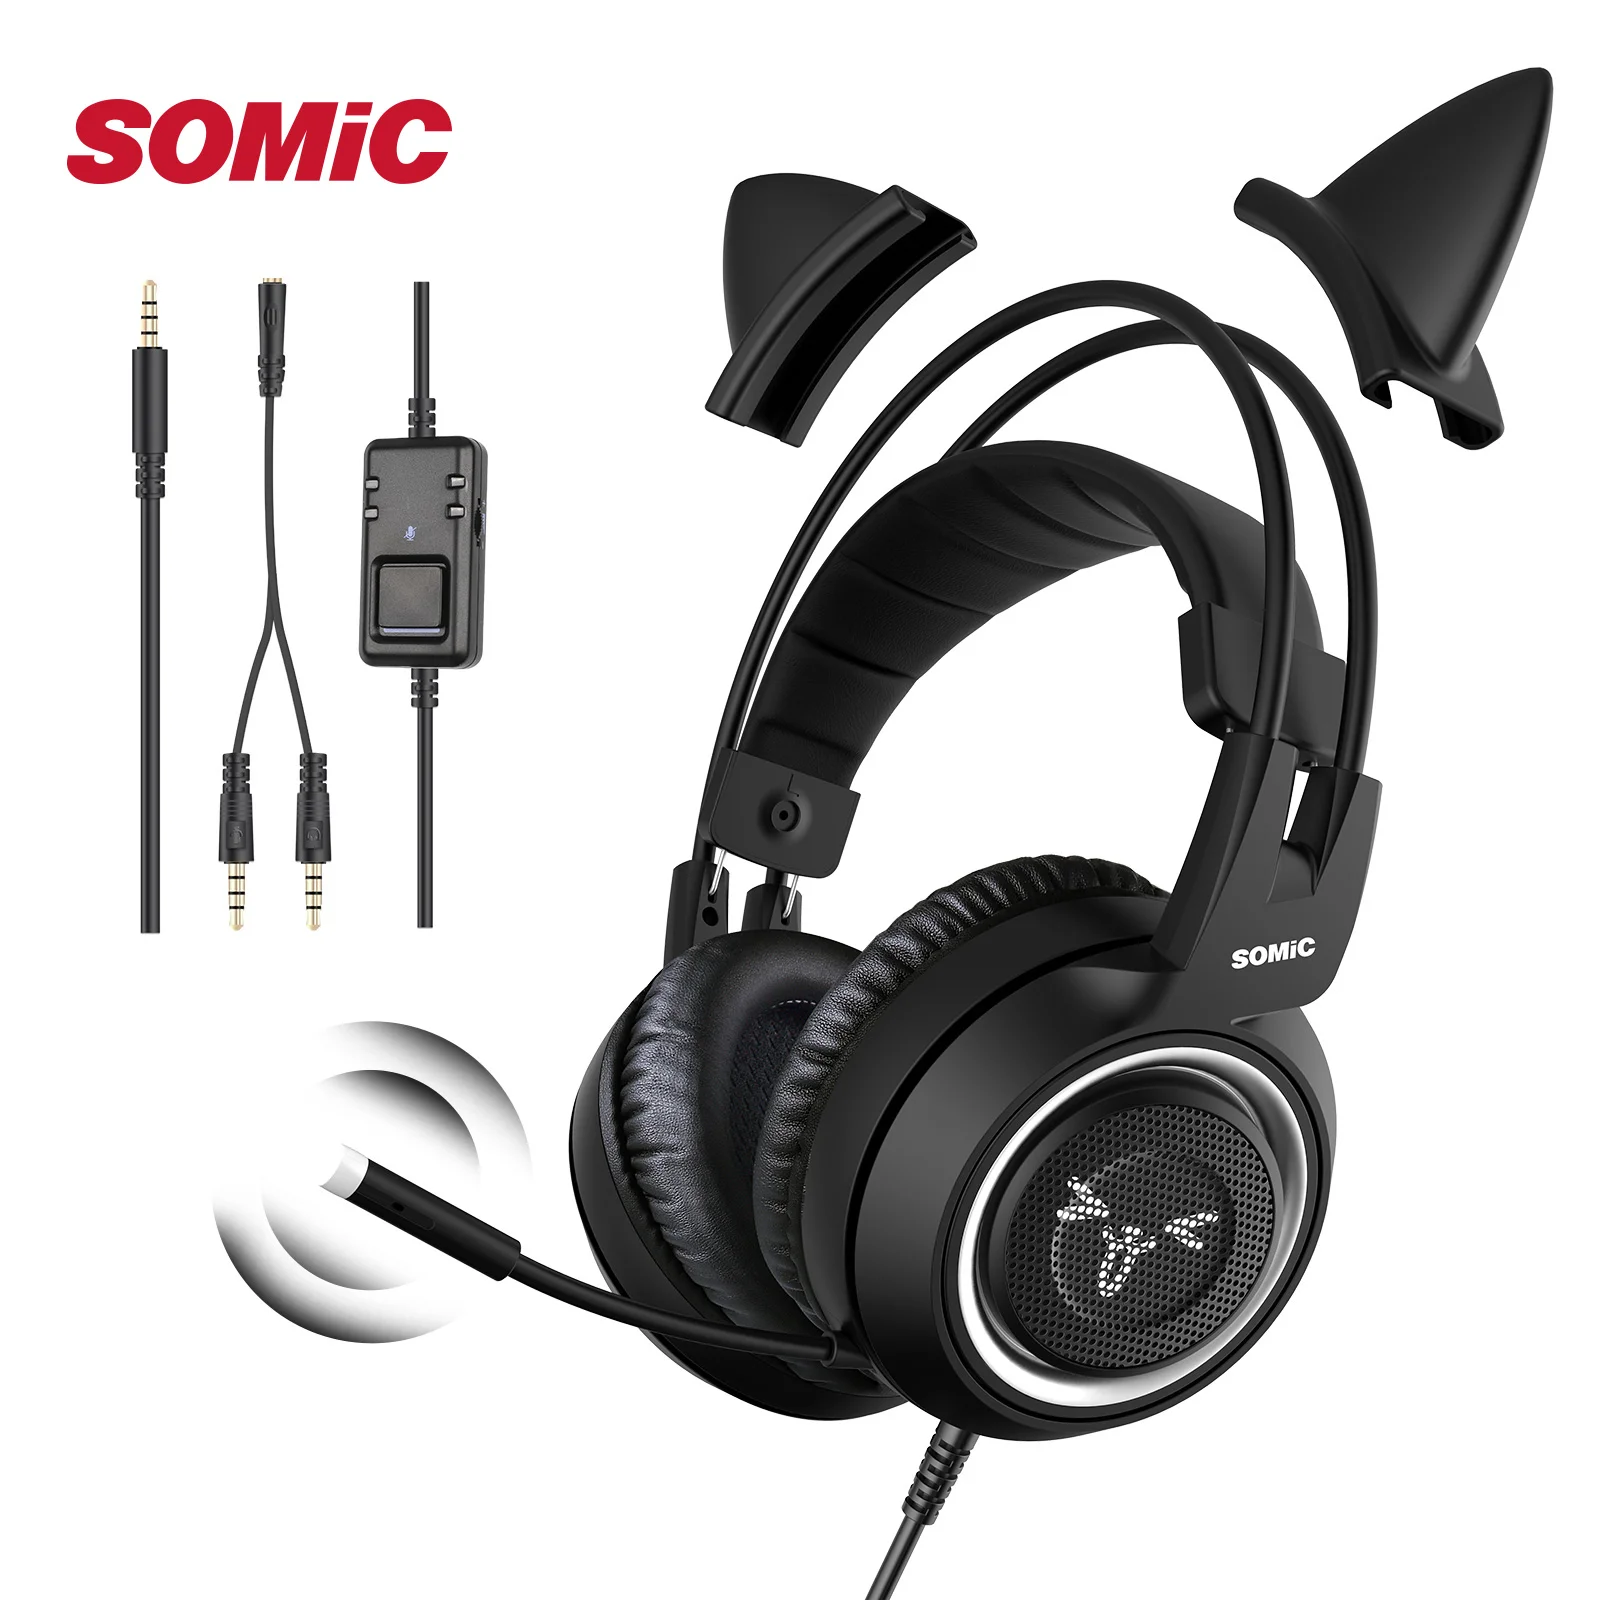 SOMIC 3.5mm Wired Headset Gamer Black Cat Ear Headphone for PS5 PS4 PC Phone XBOX Switch Gaming Overear Earphone With Mic G951s